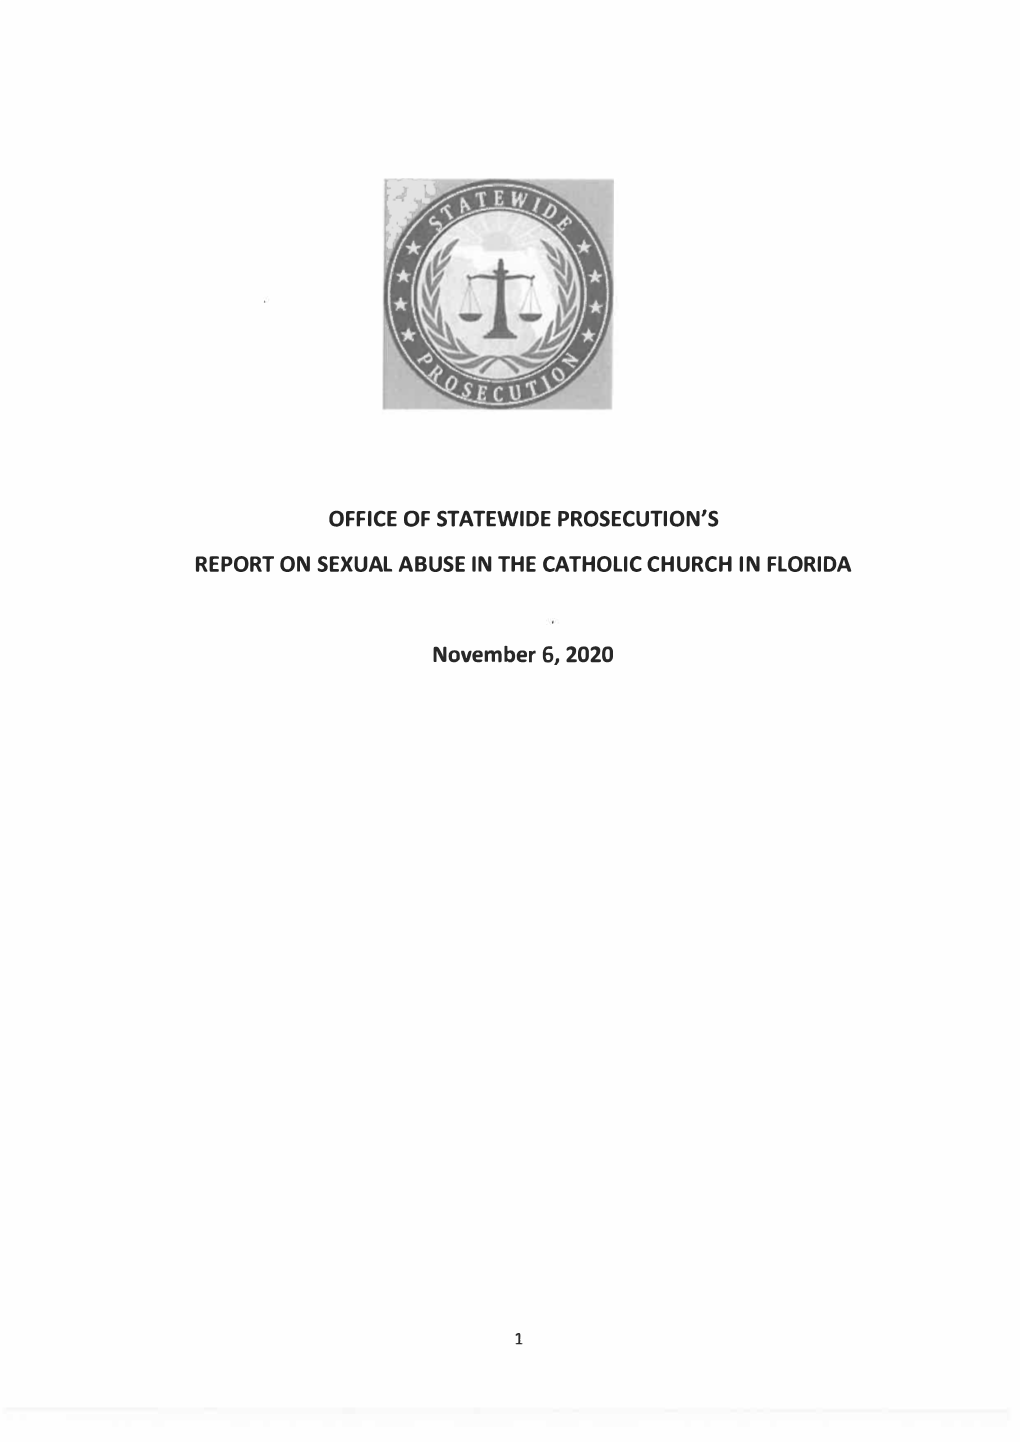 Office of Statewide Prosecution's Report on Sexual Abuse in the Catholic Church in Florida